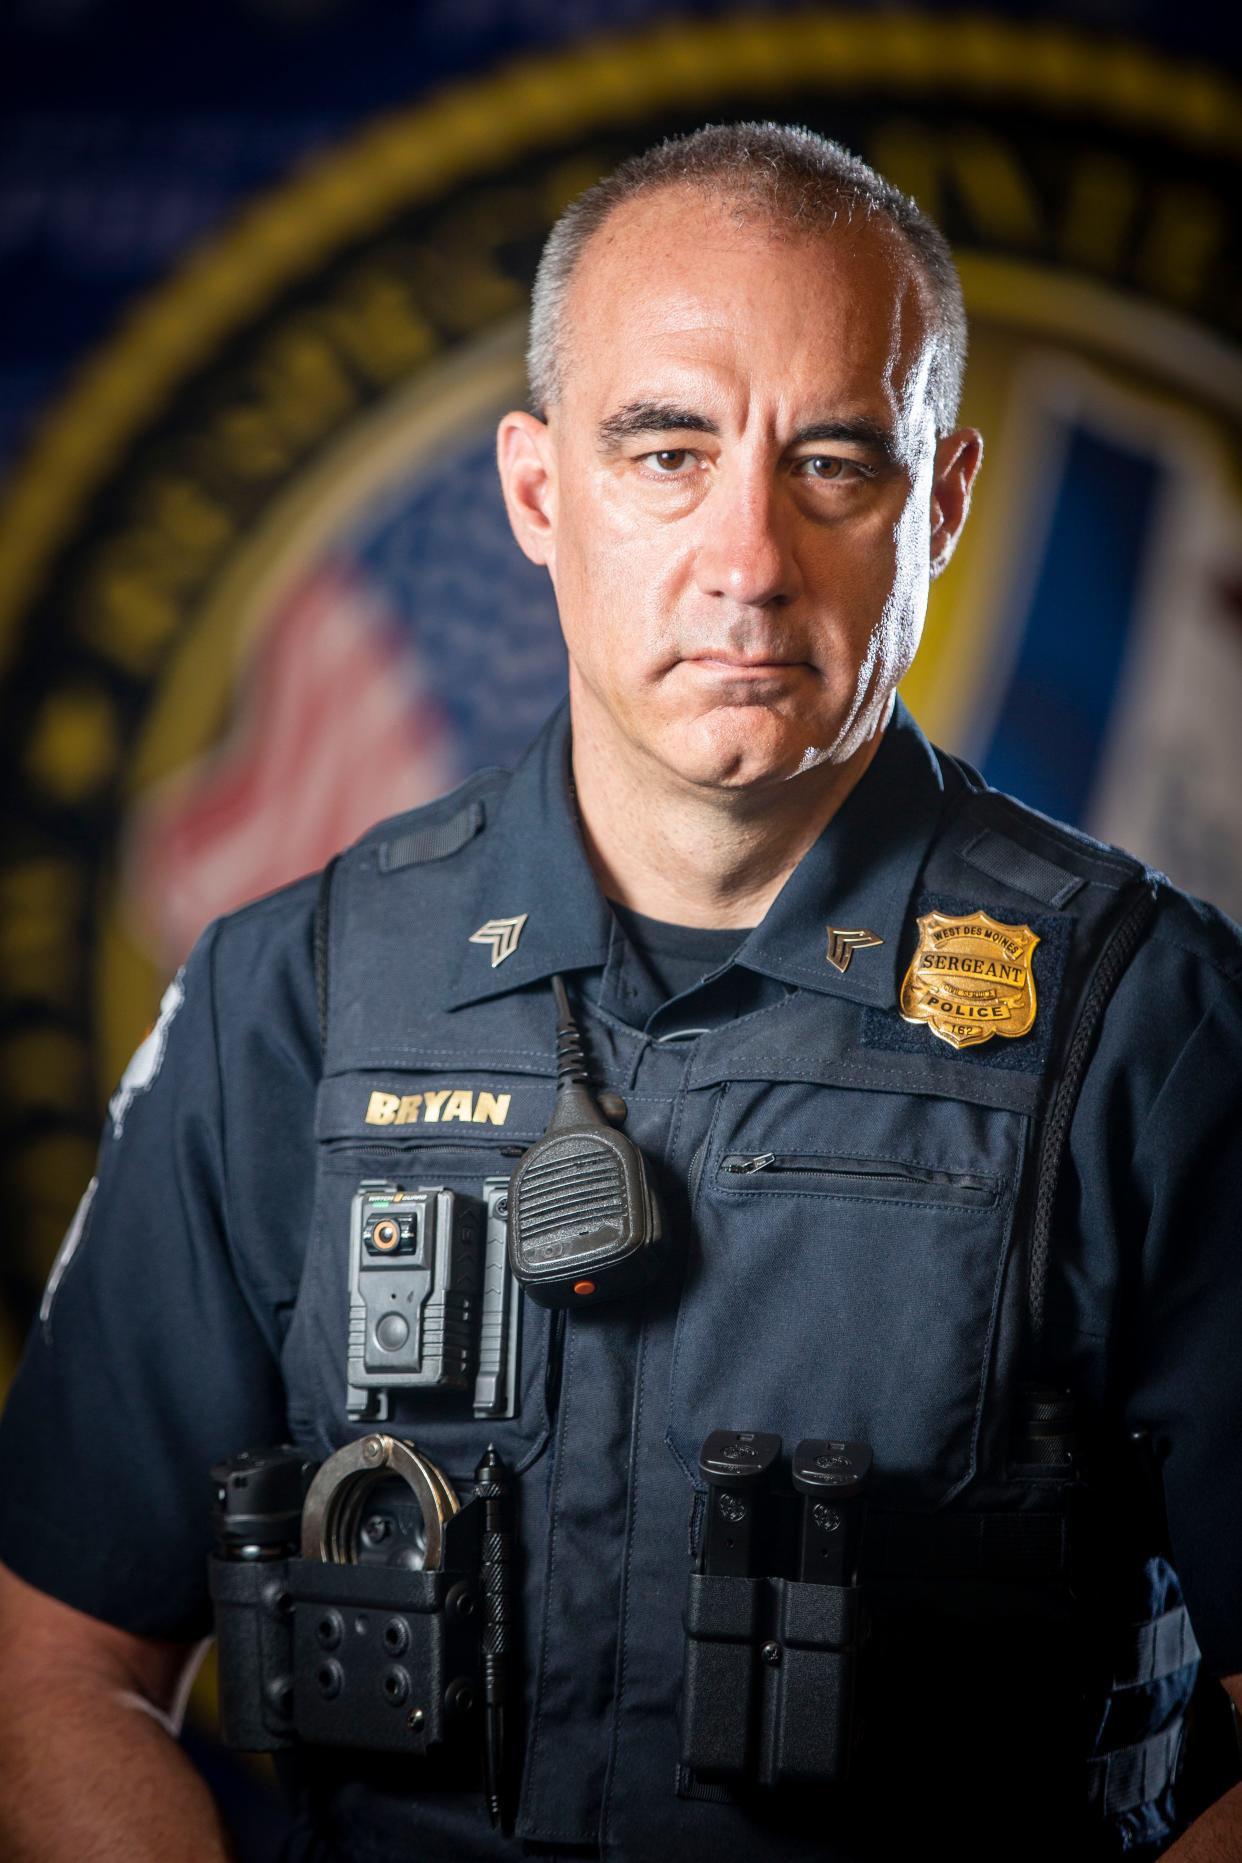 Sgt. Jason Bryan of the West Des Moines Police stands for a photo at the police department Thursday, April 8, 2021.